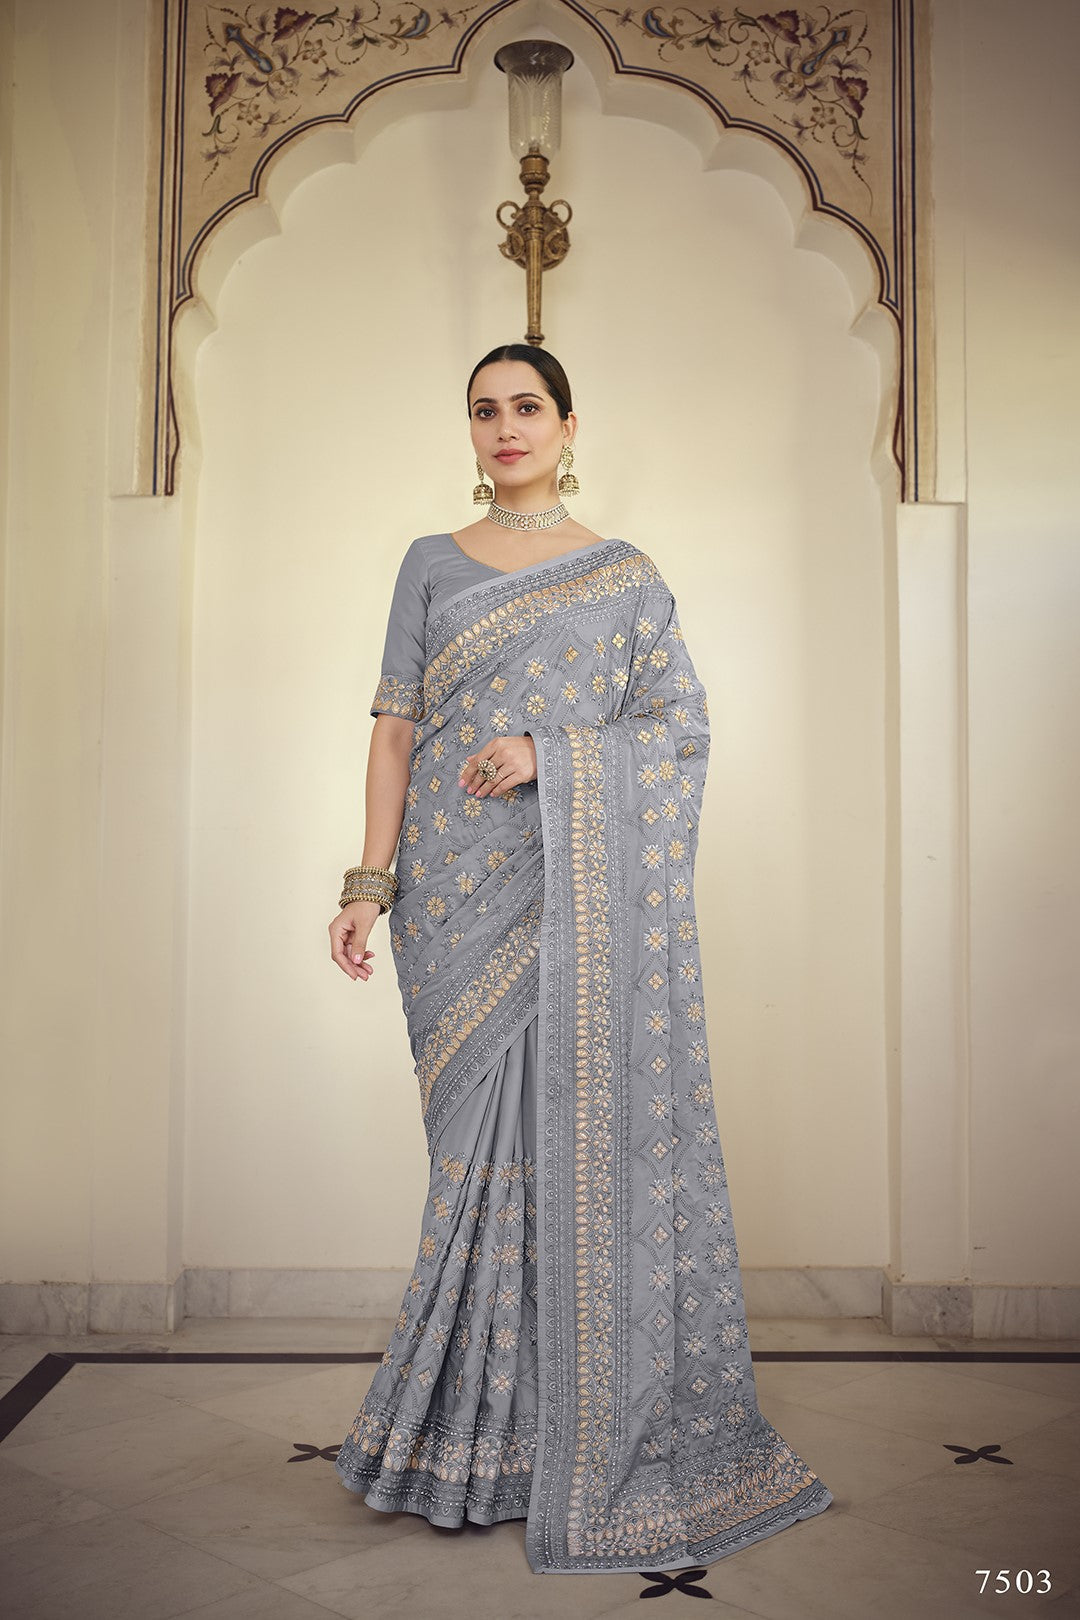 Grey Satin Georgette Sarees with Blouse for Wedding | Indian Festival Sari - Resham Embroidery Work